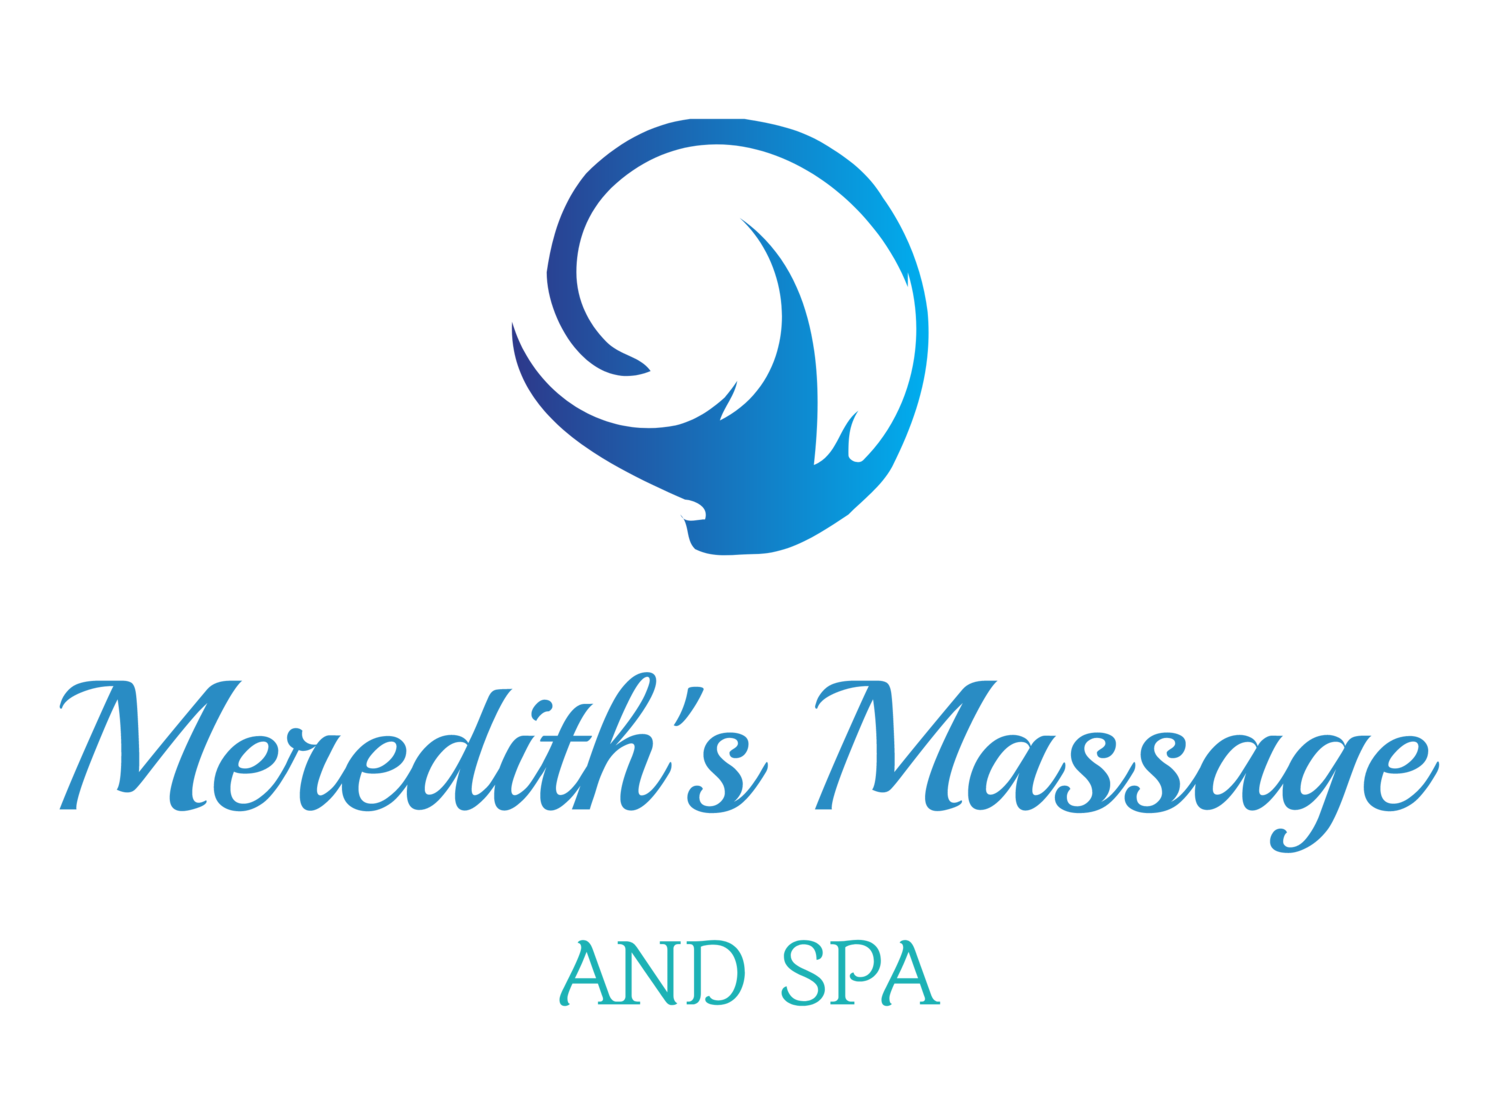 Meredith's Massage and Spa